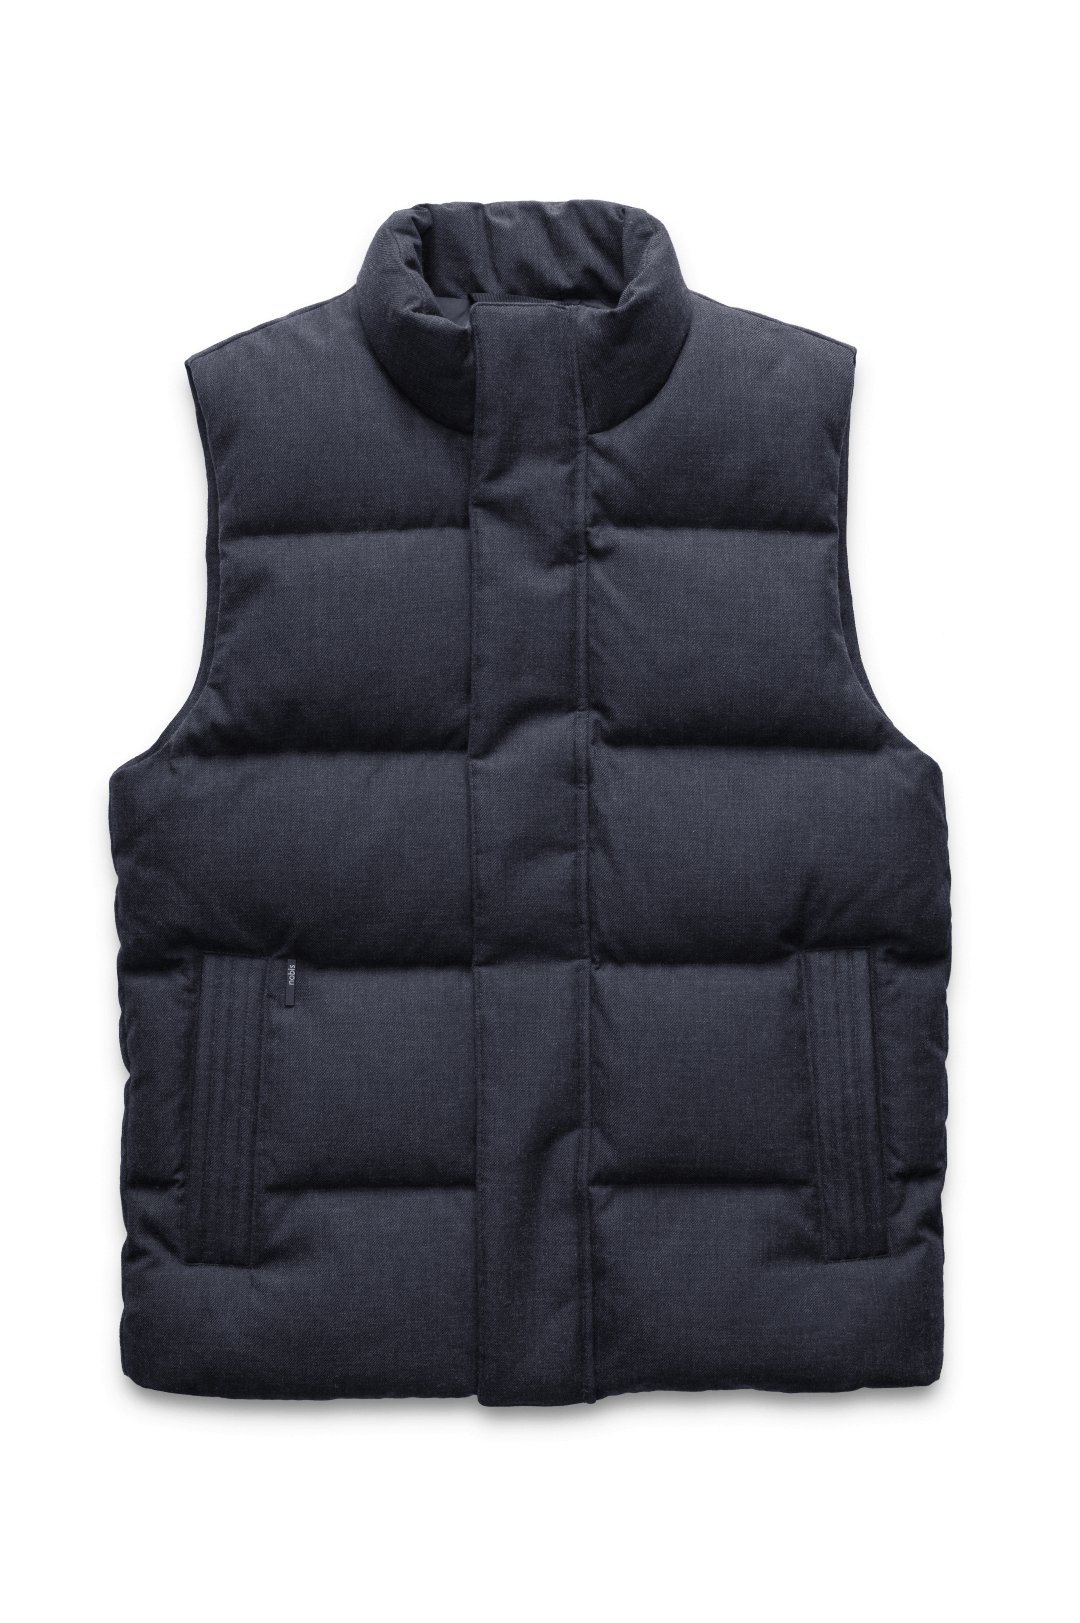 Vale Men's Quilted Vest in hip length, Canadian duck down insulation, and two-way zipper, in H. Navy